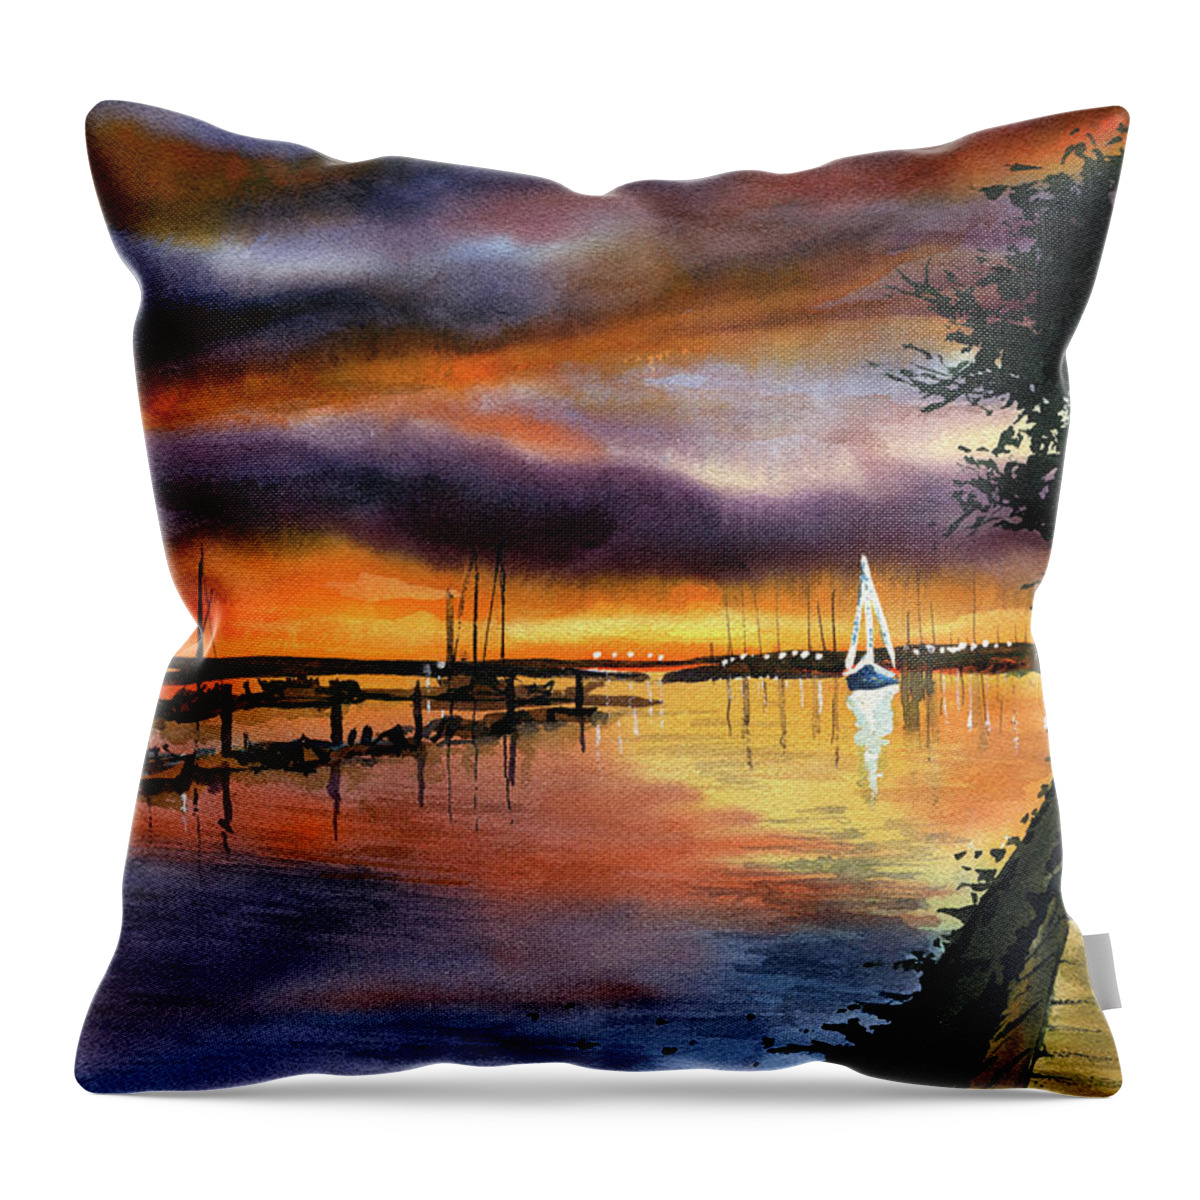 Portugal Throw Pillow featuring the painting Mirage - Olhao Ria Formosa Portugal by Dora Hathazi Mendes